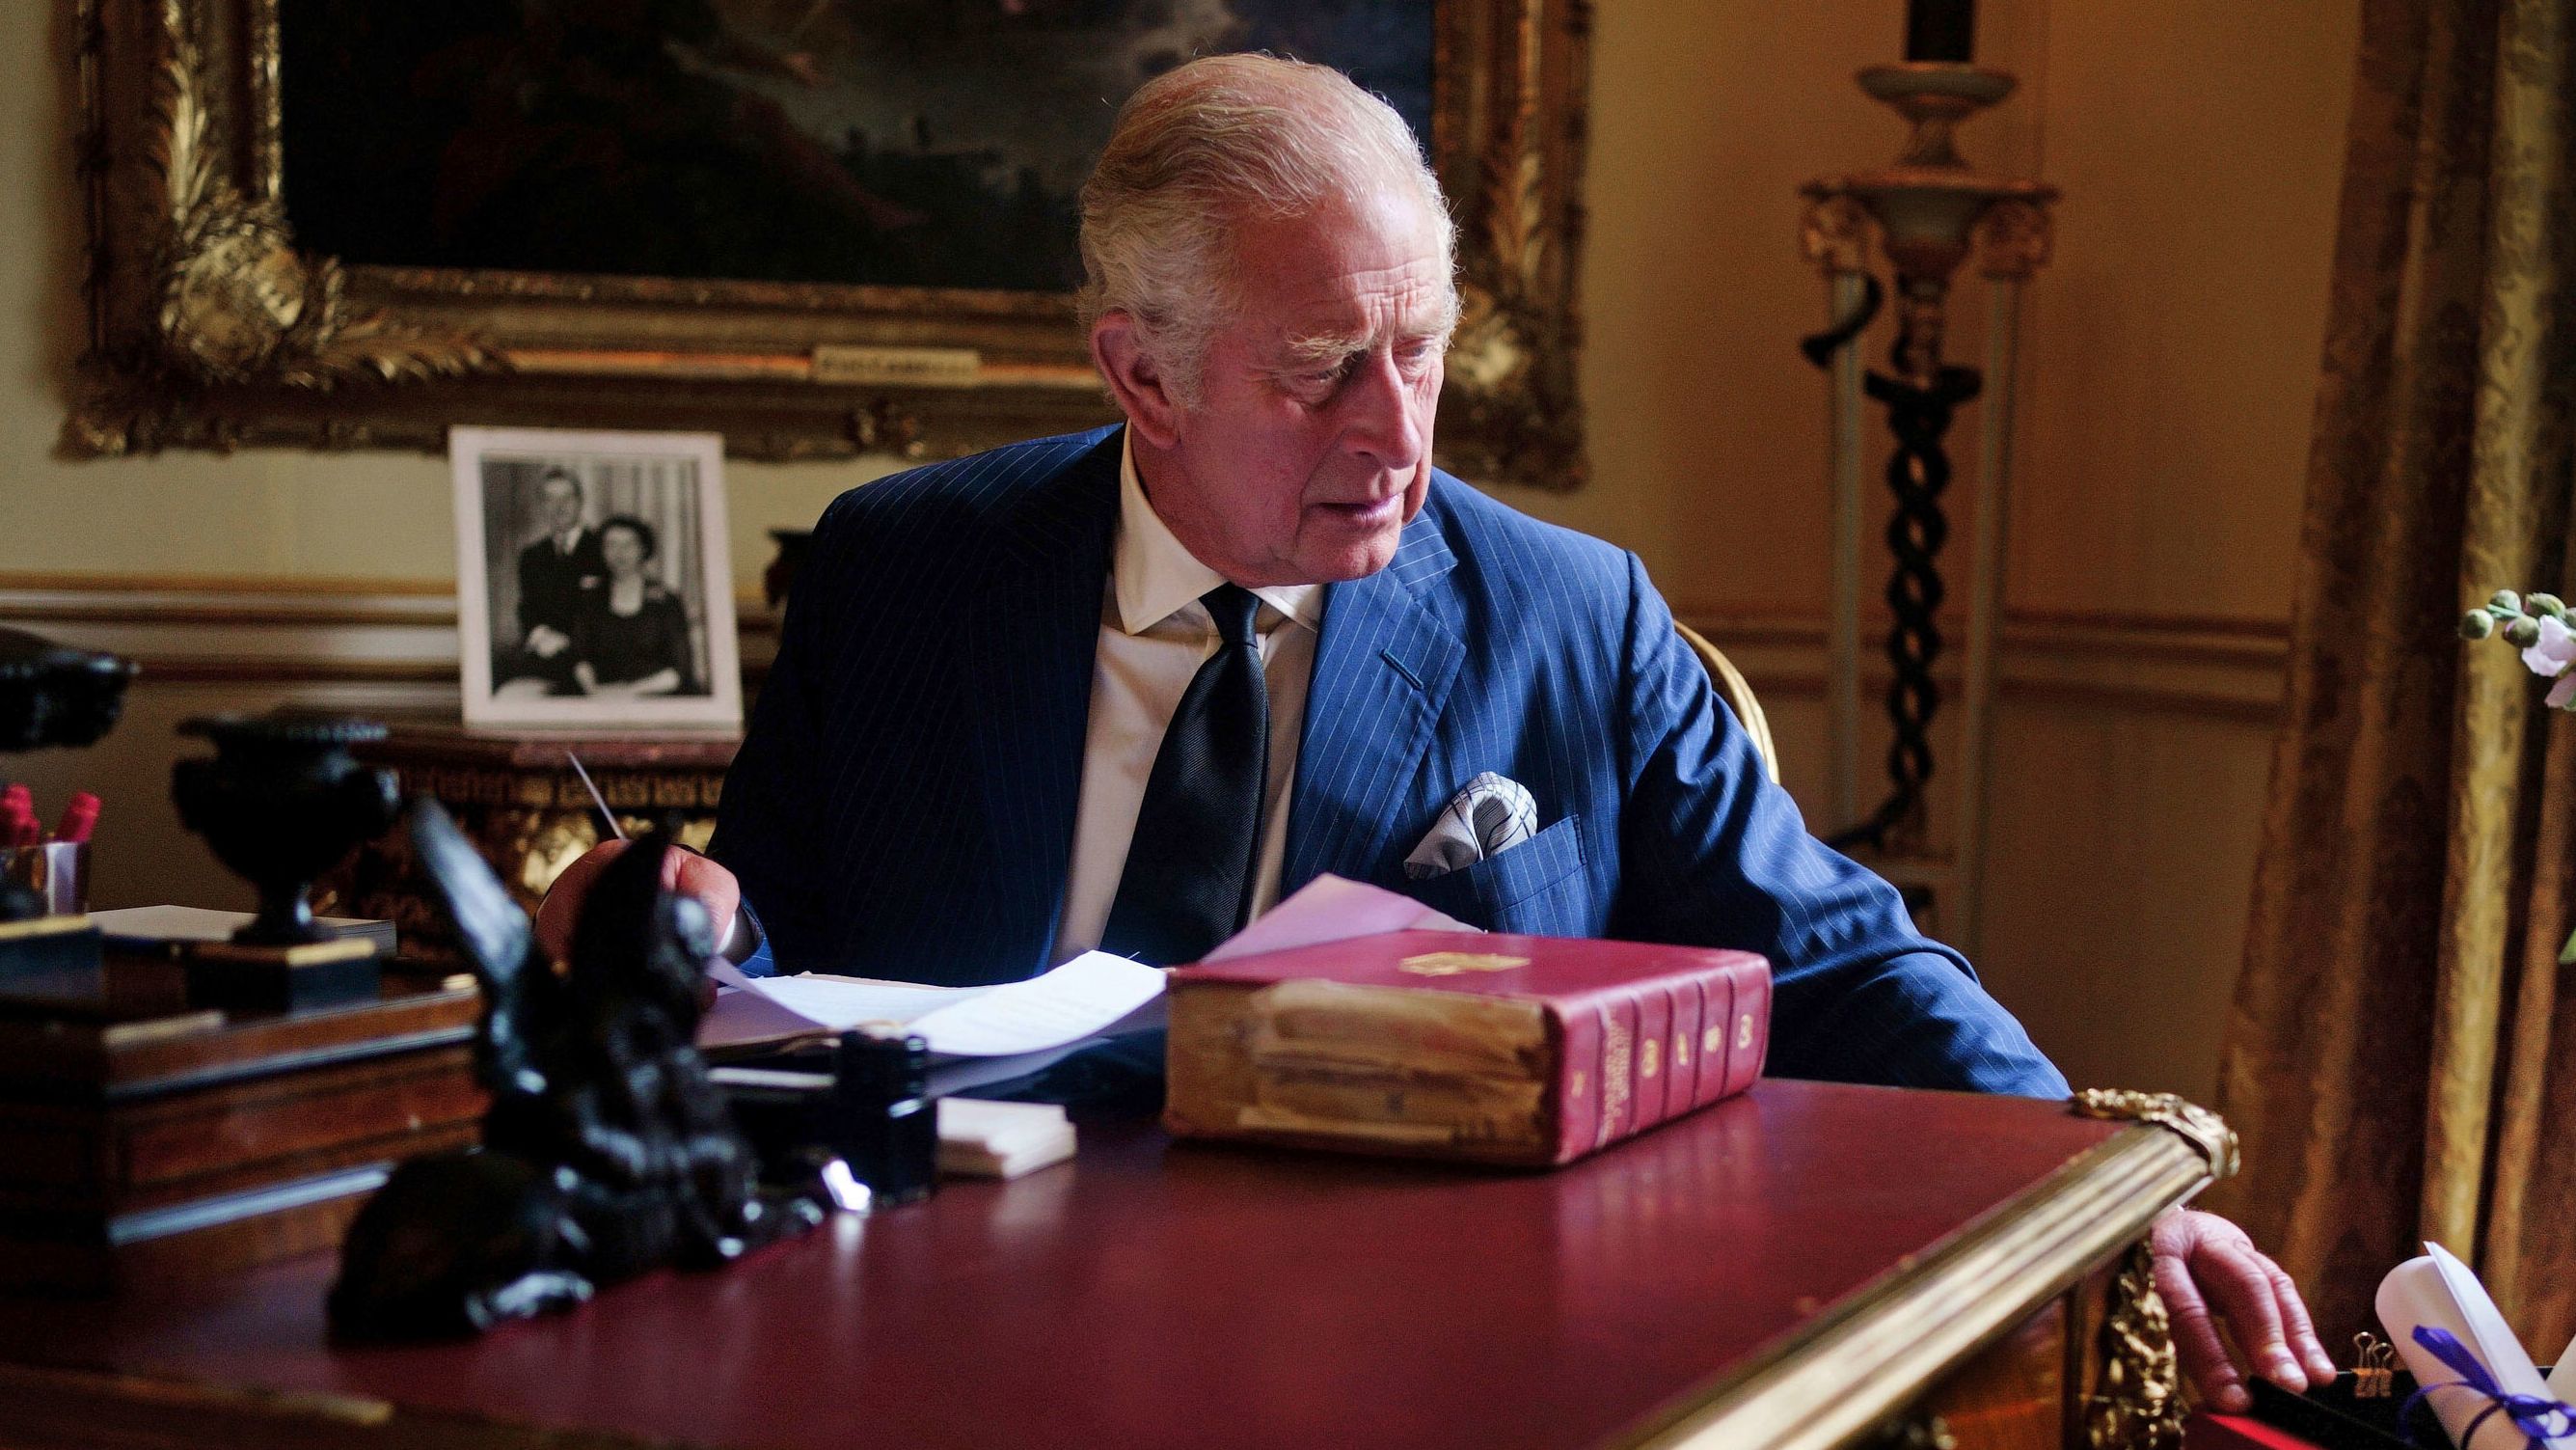 King Charles III is pictured in September carrying out official government duties at Buckingham Palace.